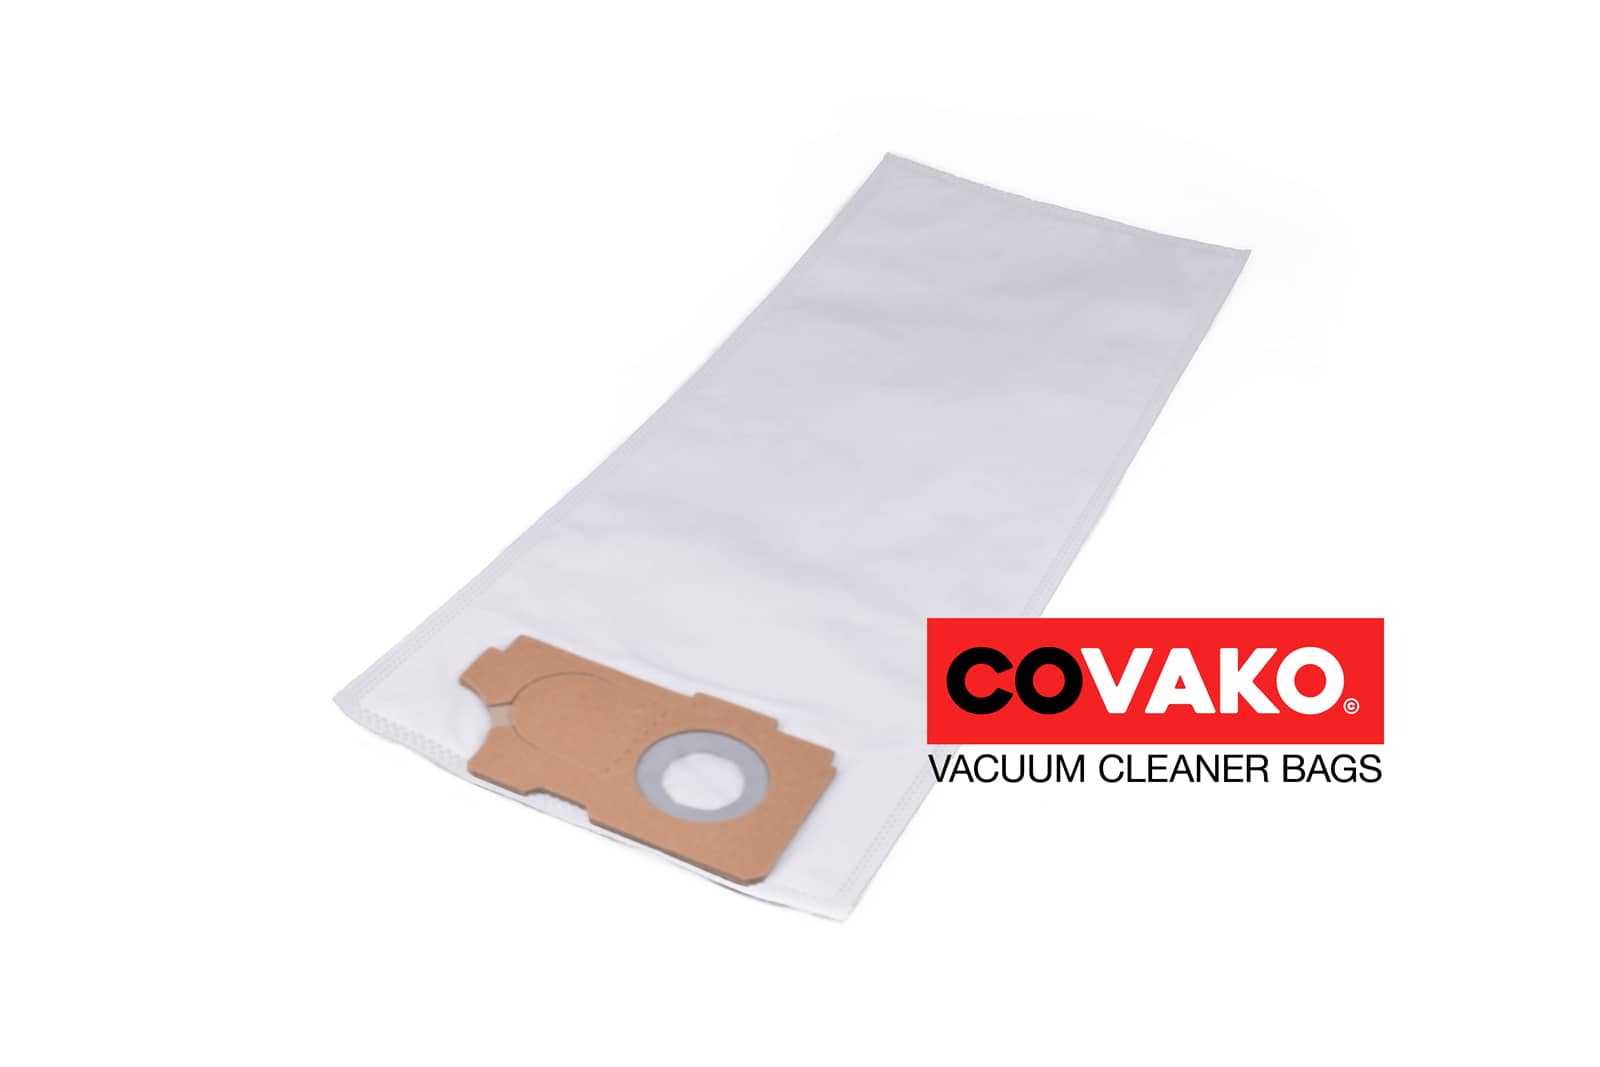 Oehme Otto Comfort 46 / Synthesis - Oehme Otto vacuum cleaner bags